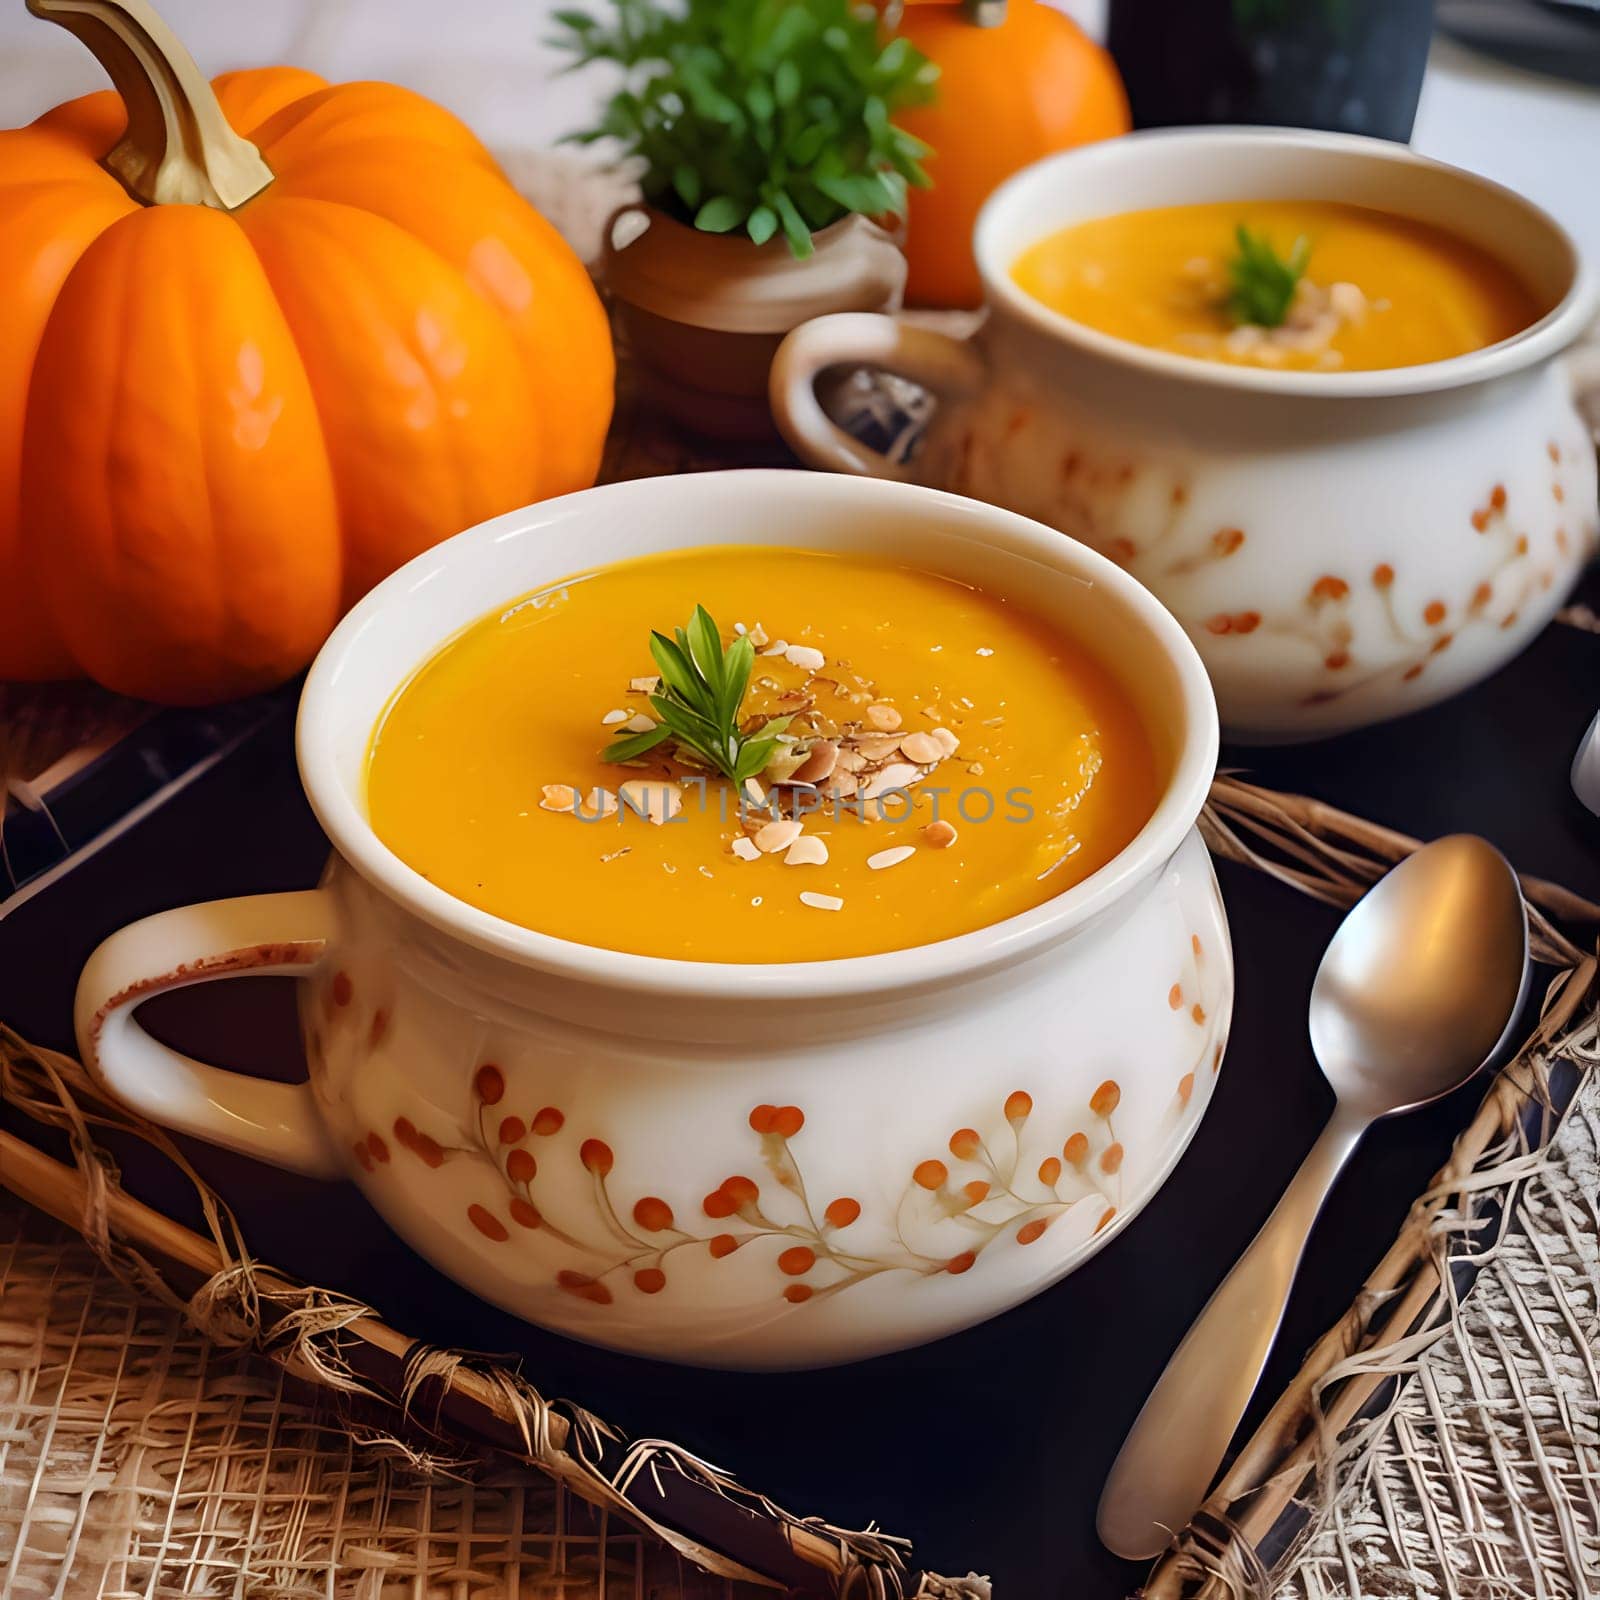 Pumpkin soup in a ceramic decorated bowl with an ear. Pumpkin as a dish of thanksgiving for the harvest. The atmosphere of joy and celebration.